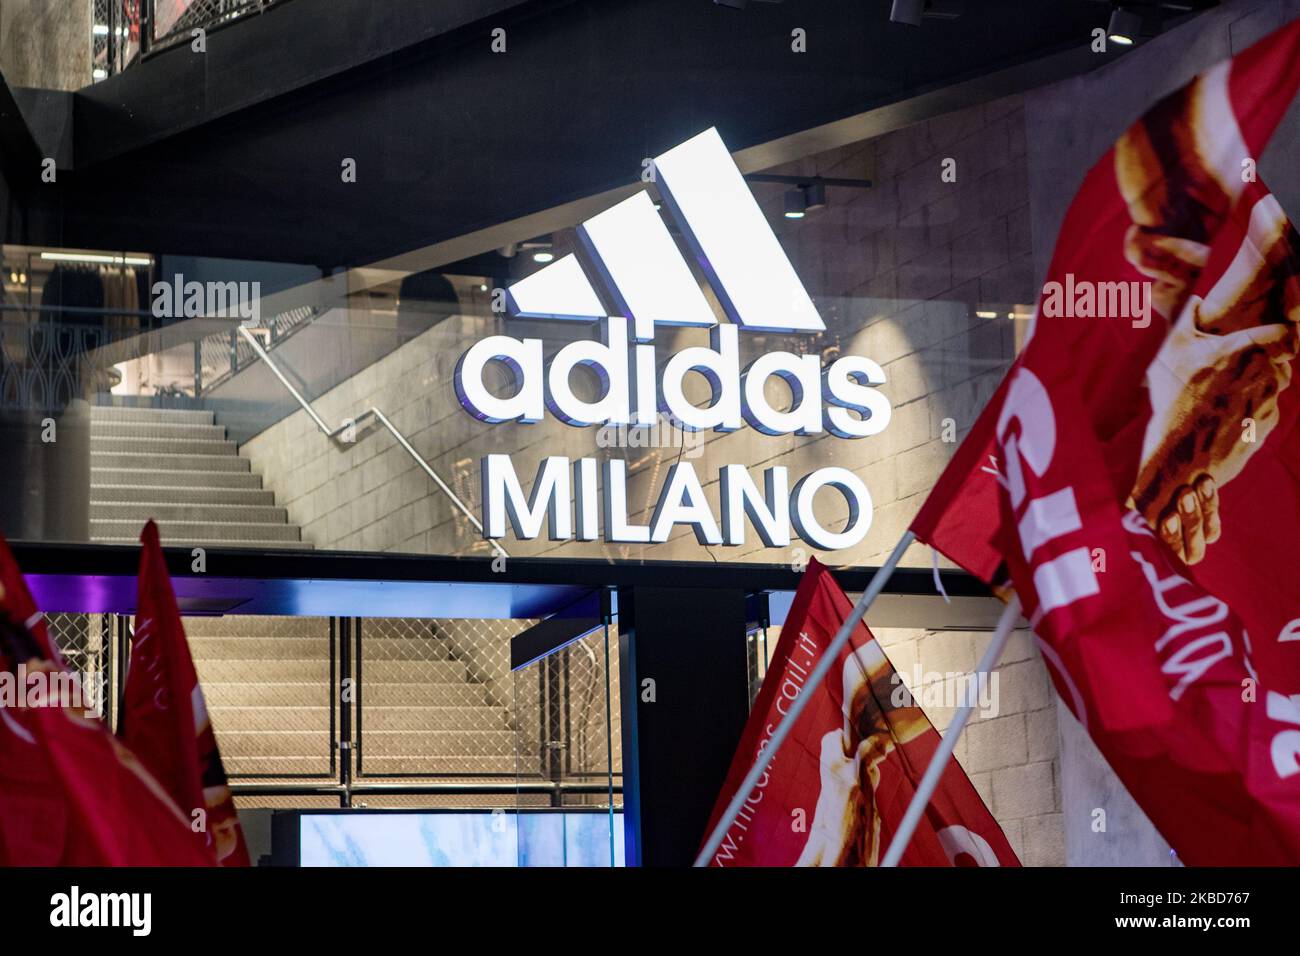 Employees of the well-known clothing brand Adidas protest in front of the Adidas  store in Milan against the 41 dismissals due to the relocation of certain  production activities to Portugal, on December